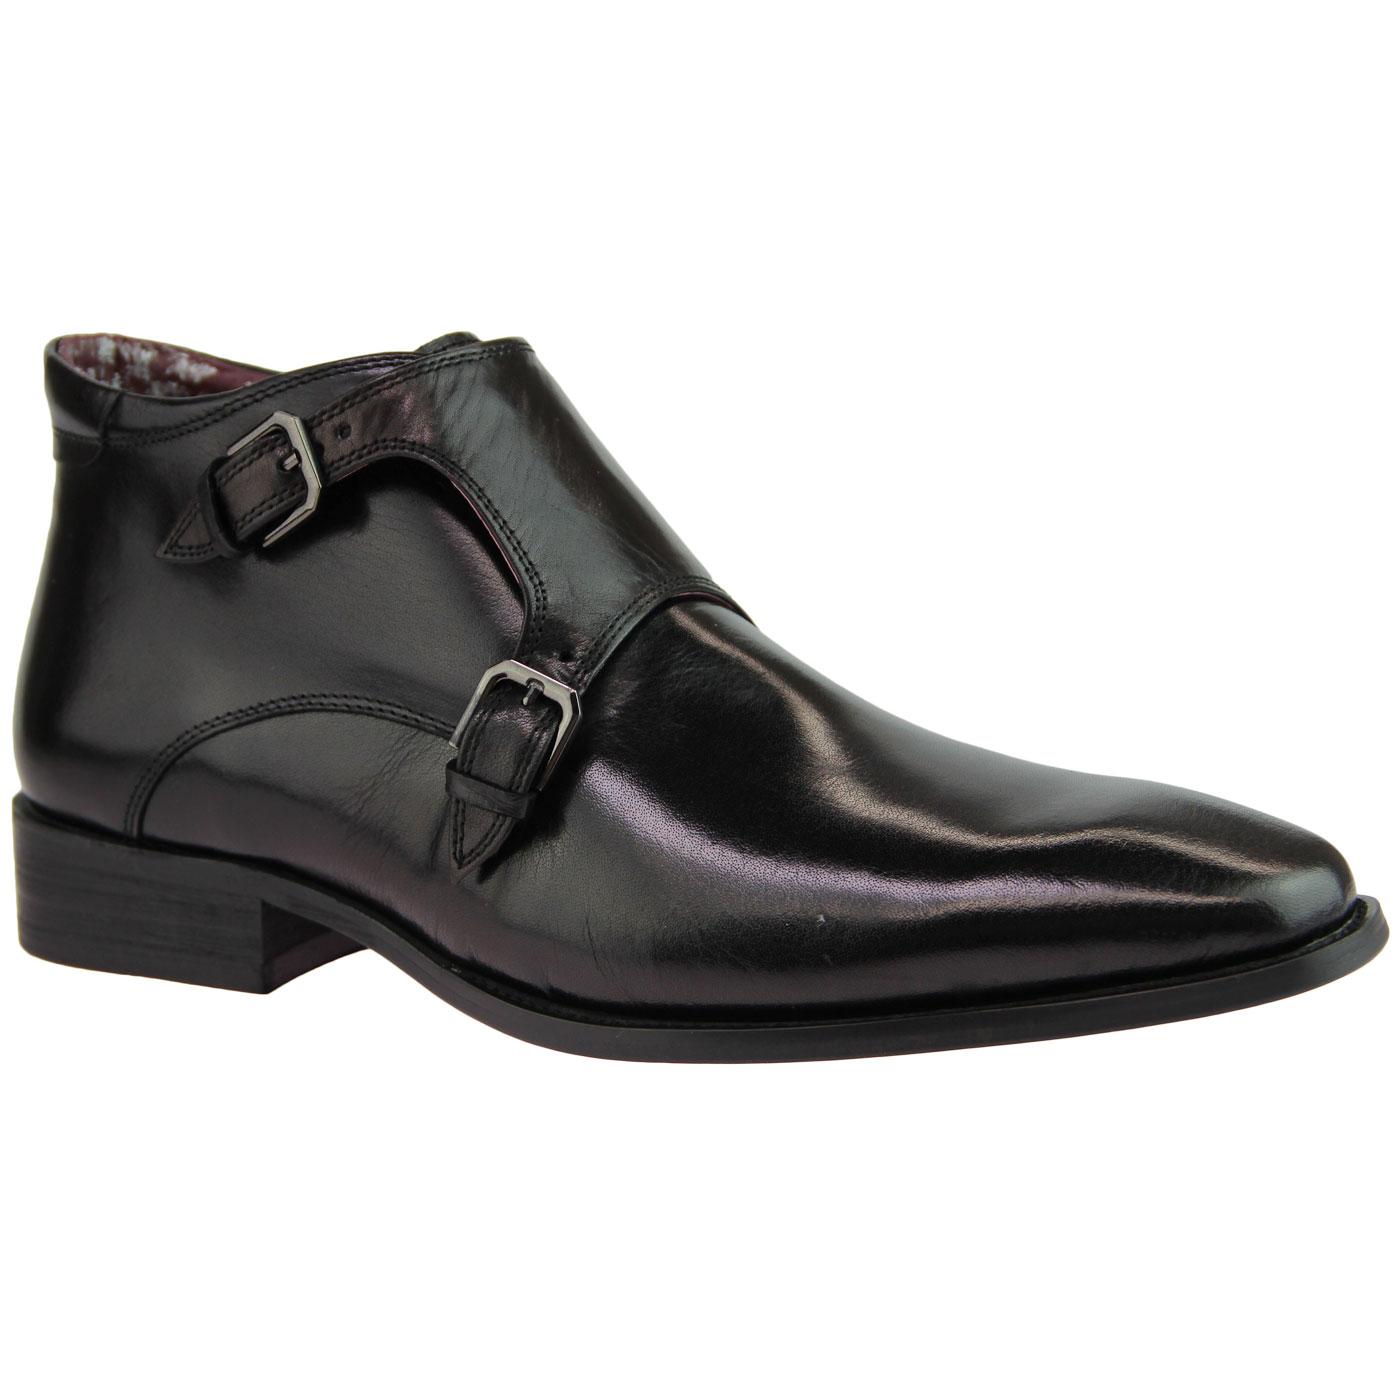 Swinford PAOLO VANDINI Monk Strap Ankle Boots (B)